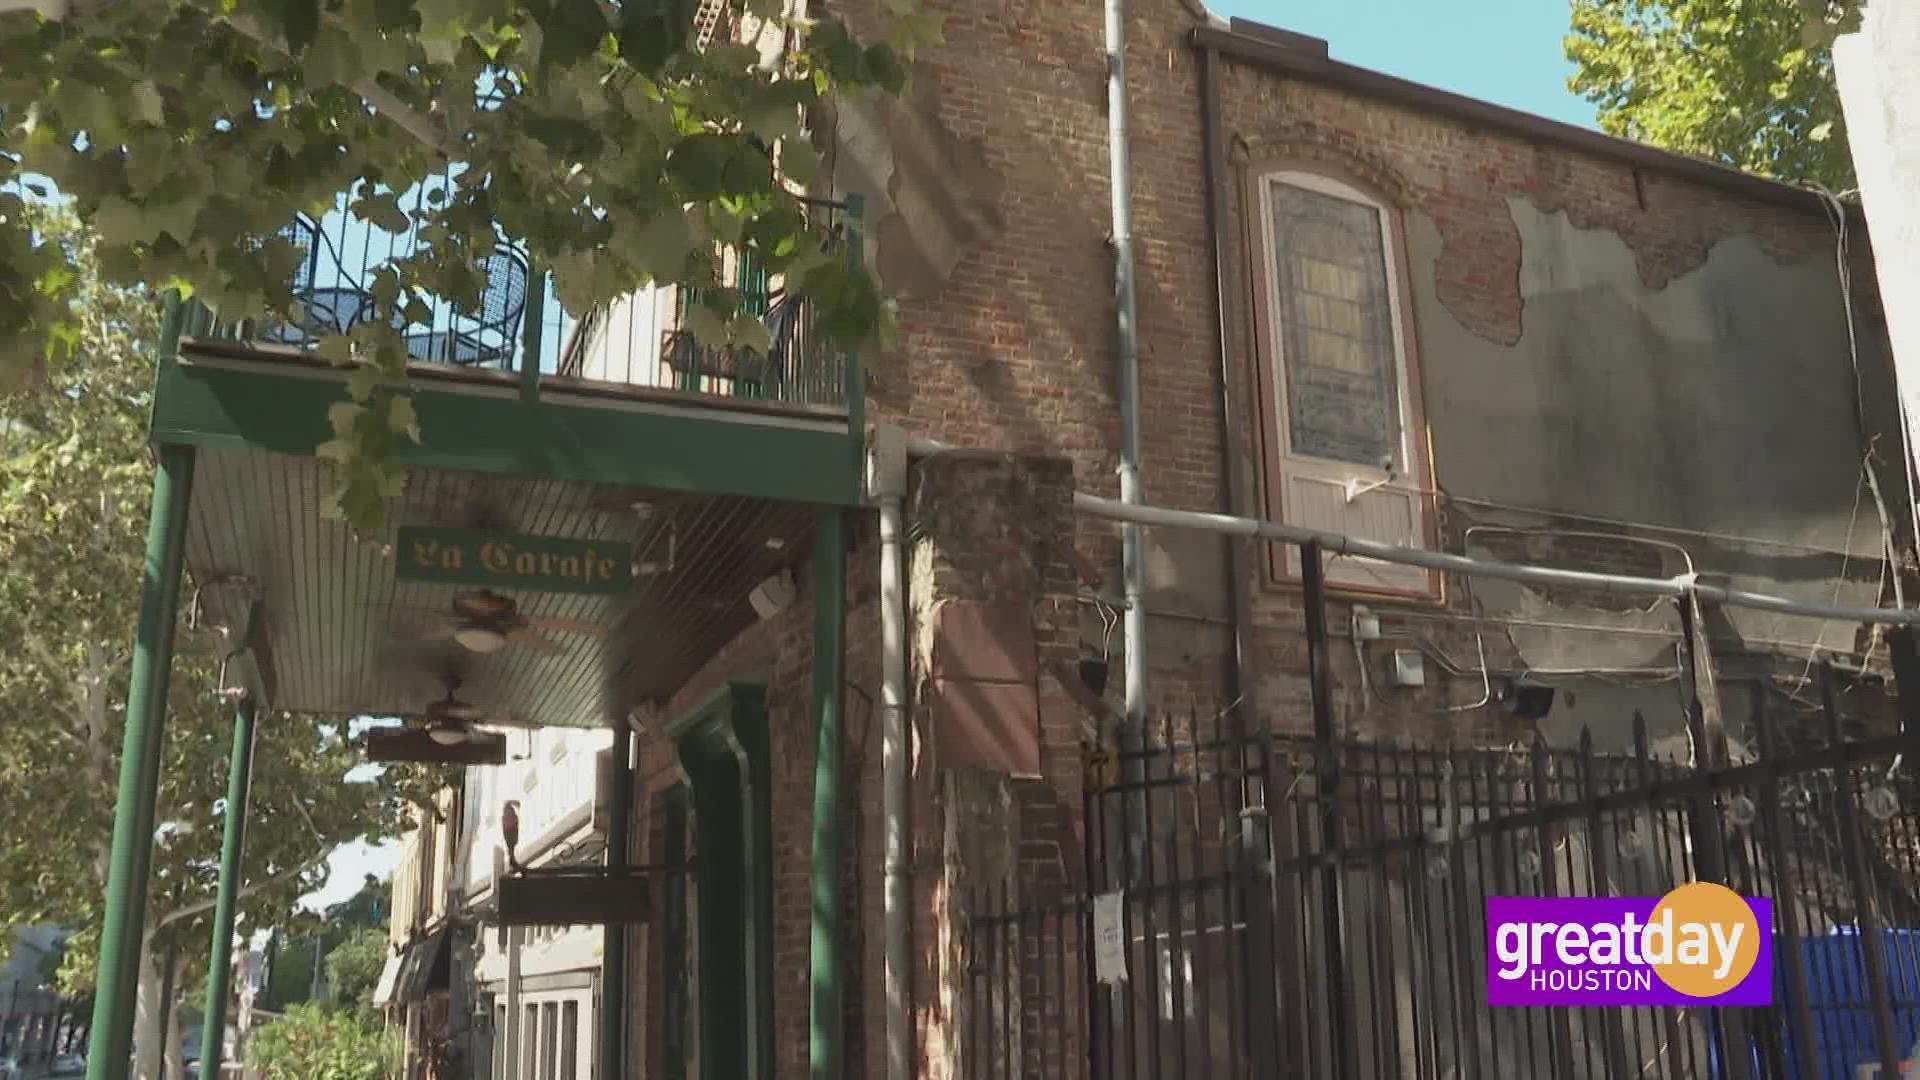 Said to be one of Houston's most haunted bars, La Carafe is Houston's oldest commercial building.